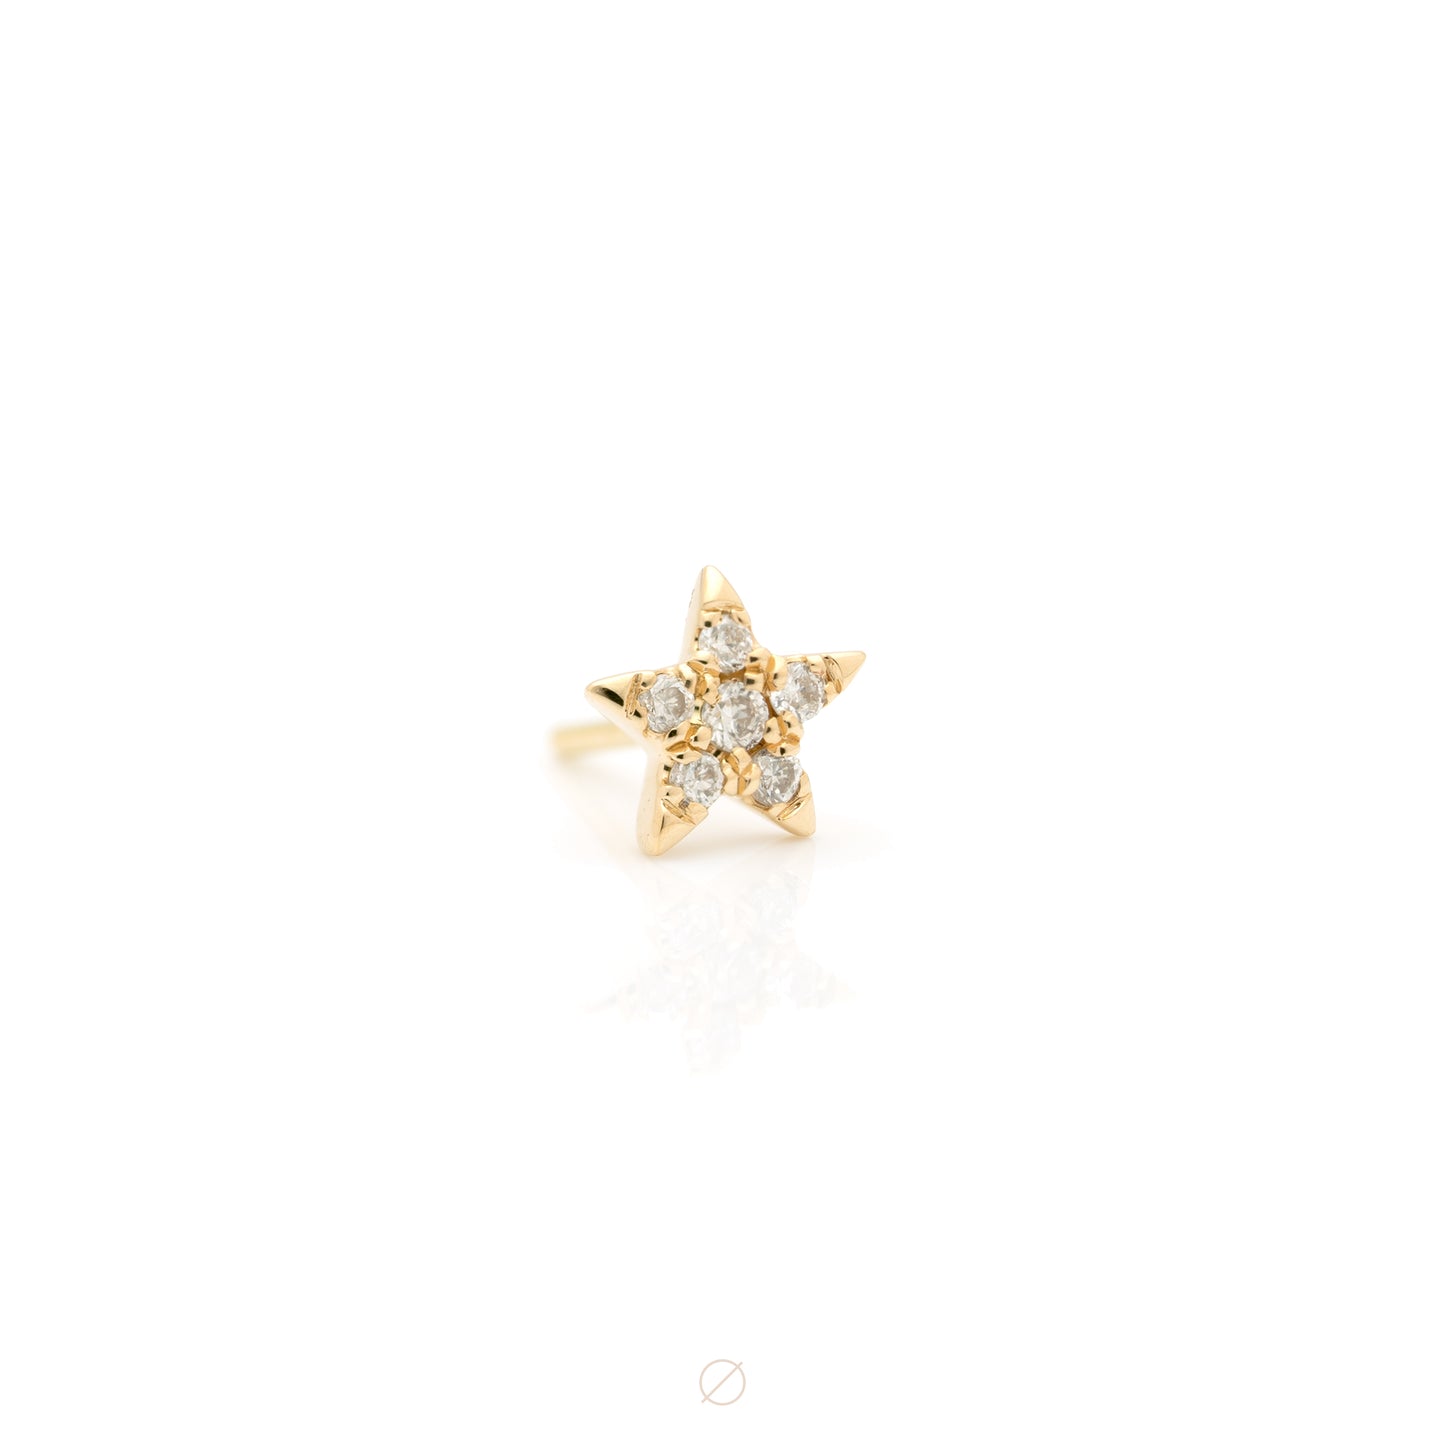 5 Point Star - Charlotte with Diamonds Press-Fit End by Modern Mood